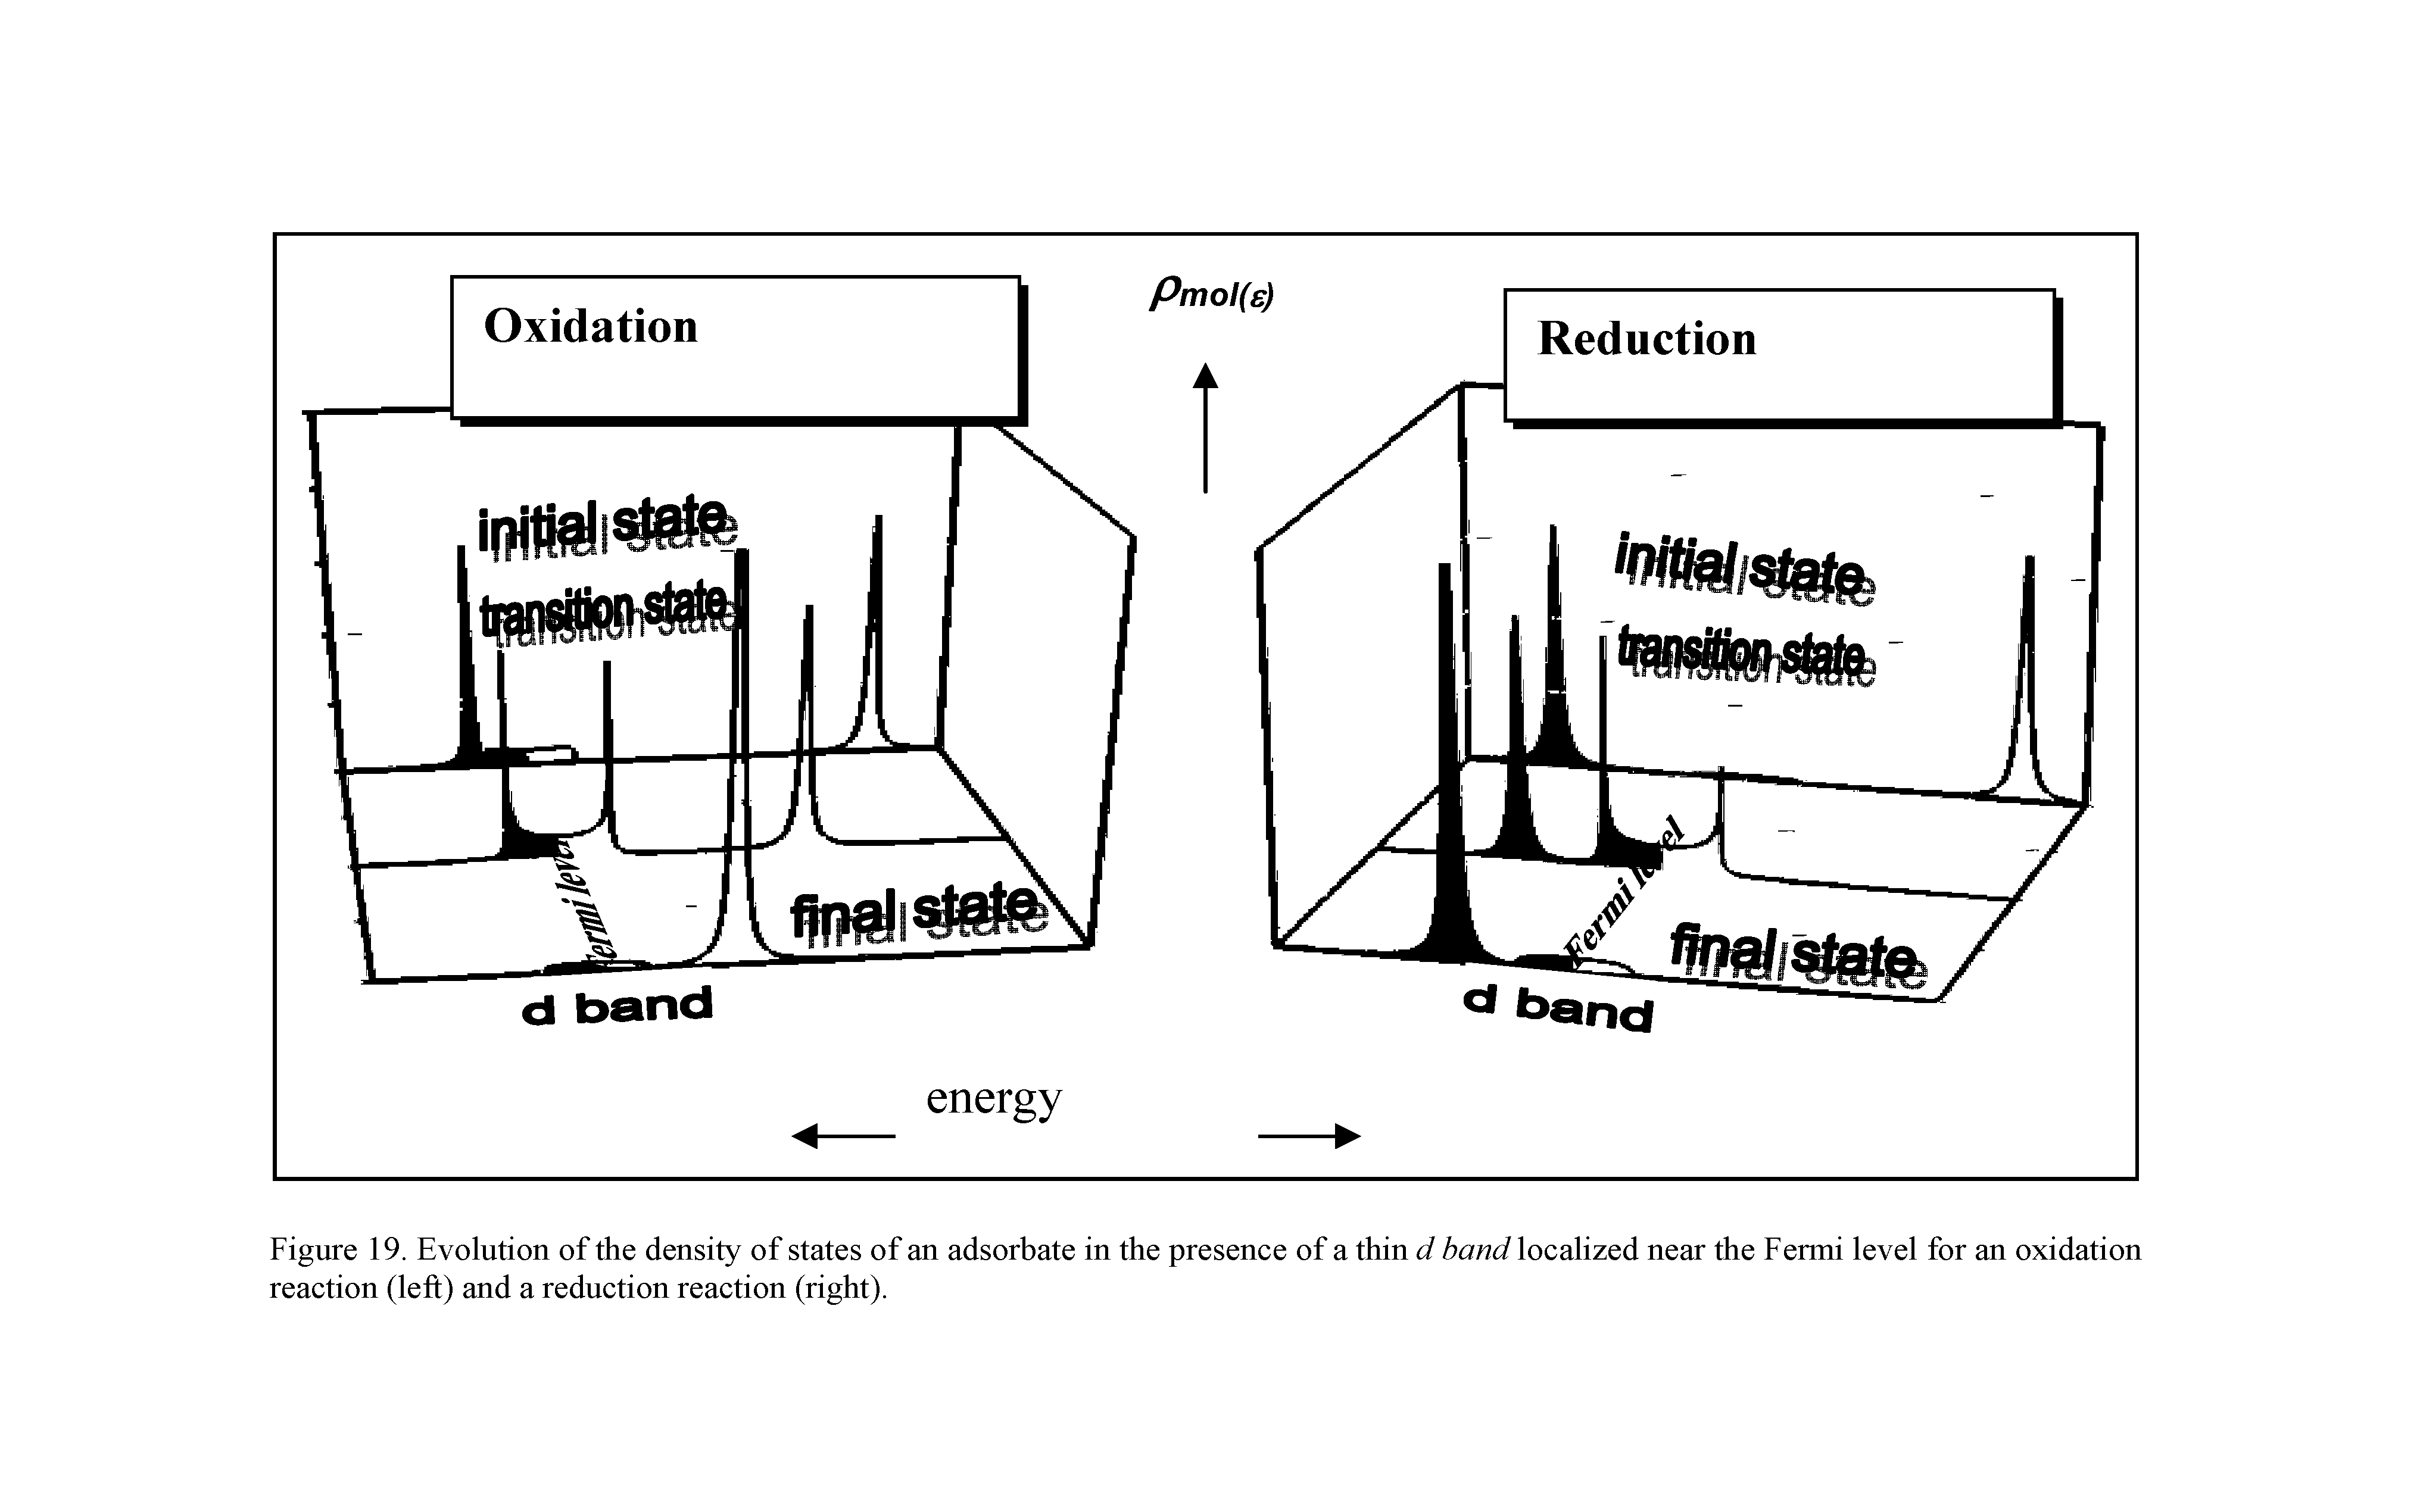 Figure 19. Evolution of the density of states of an adsorbate in the presenee of a thin d band loealized near the Fermi level for an oxidation reaetion (left) and a reduetion reaetion (right).